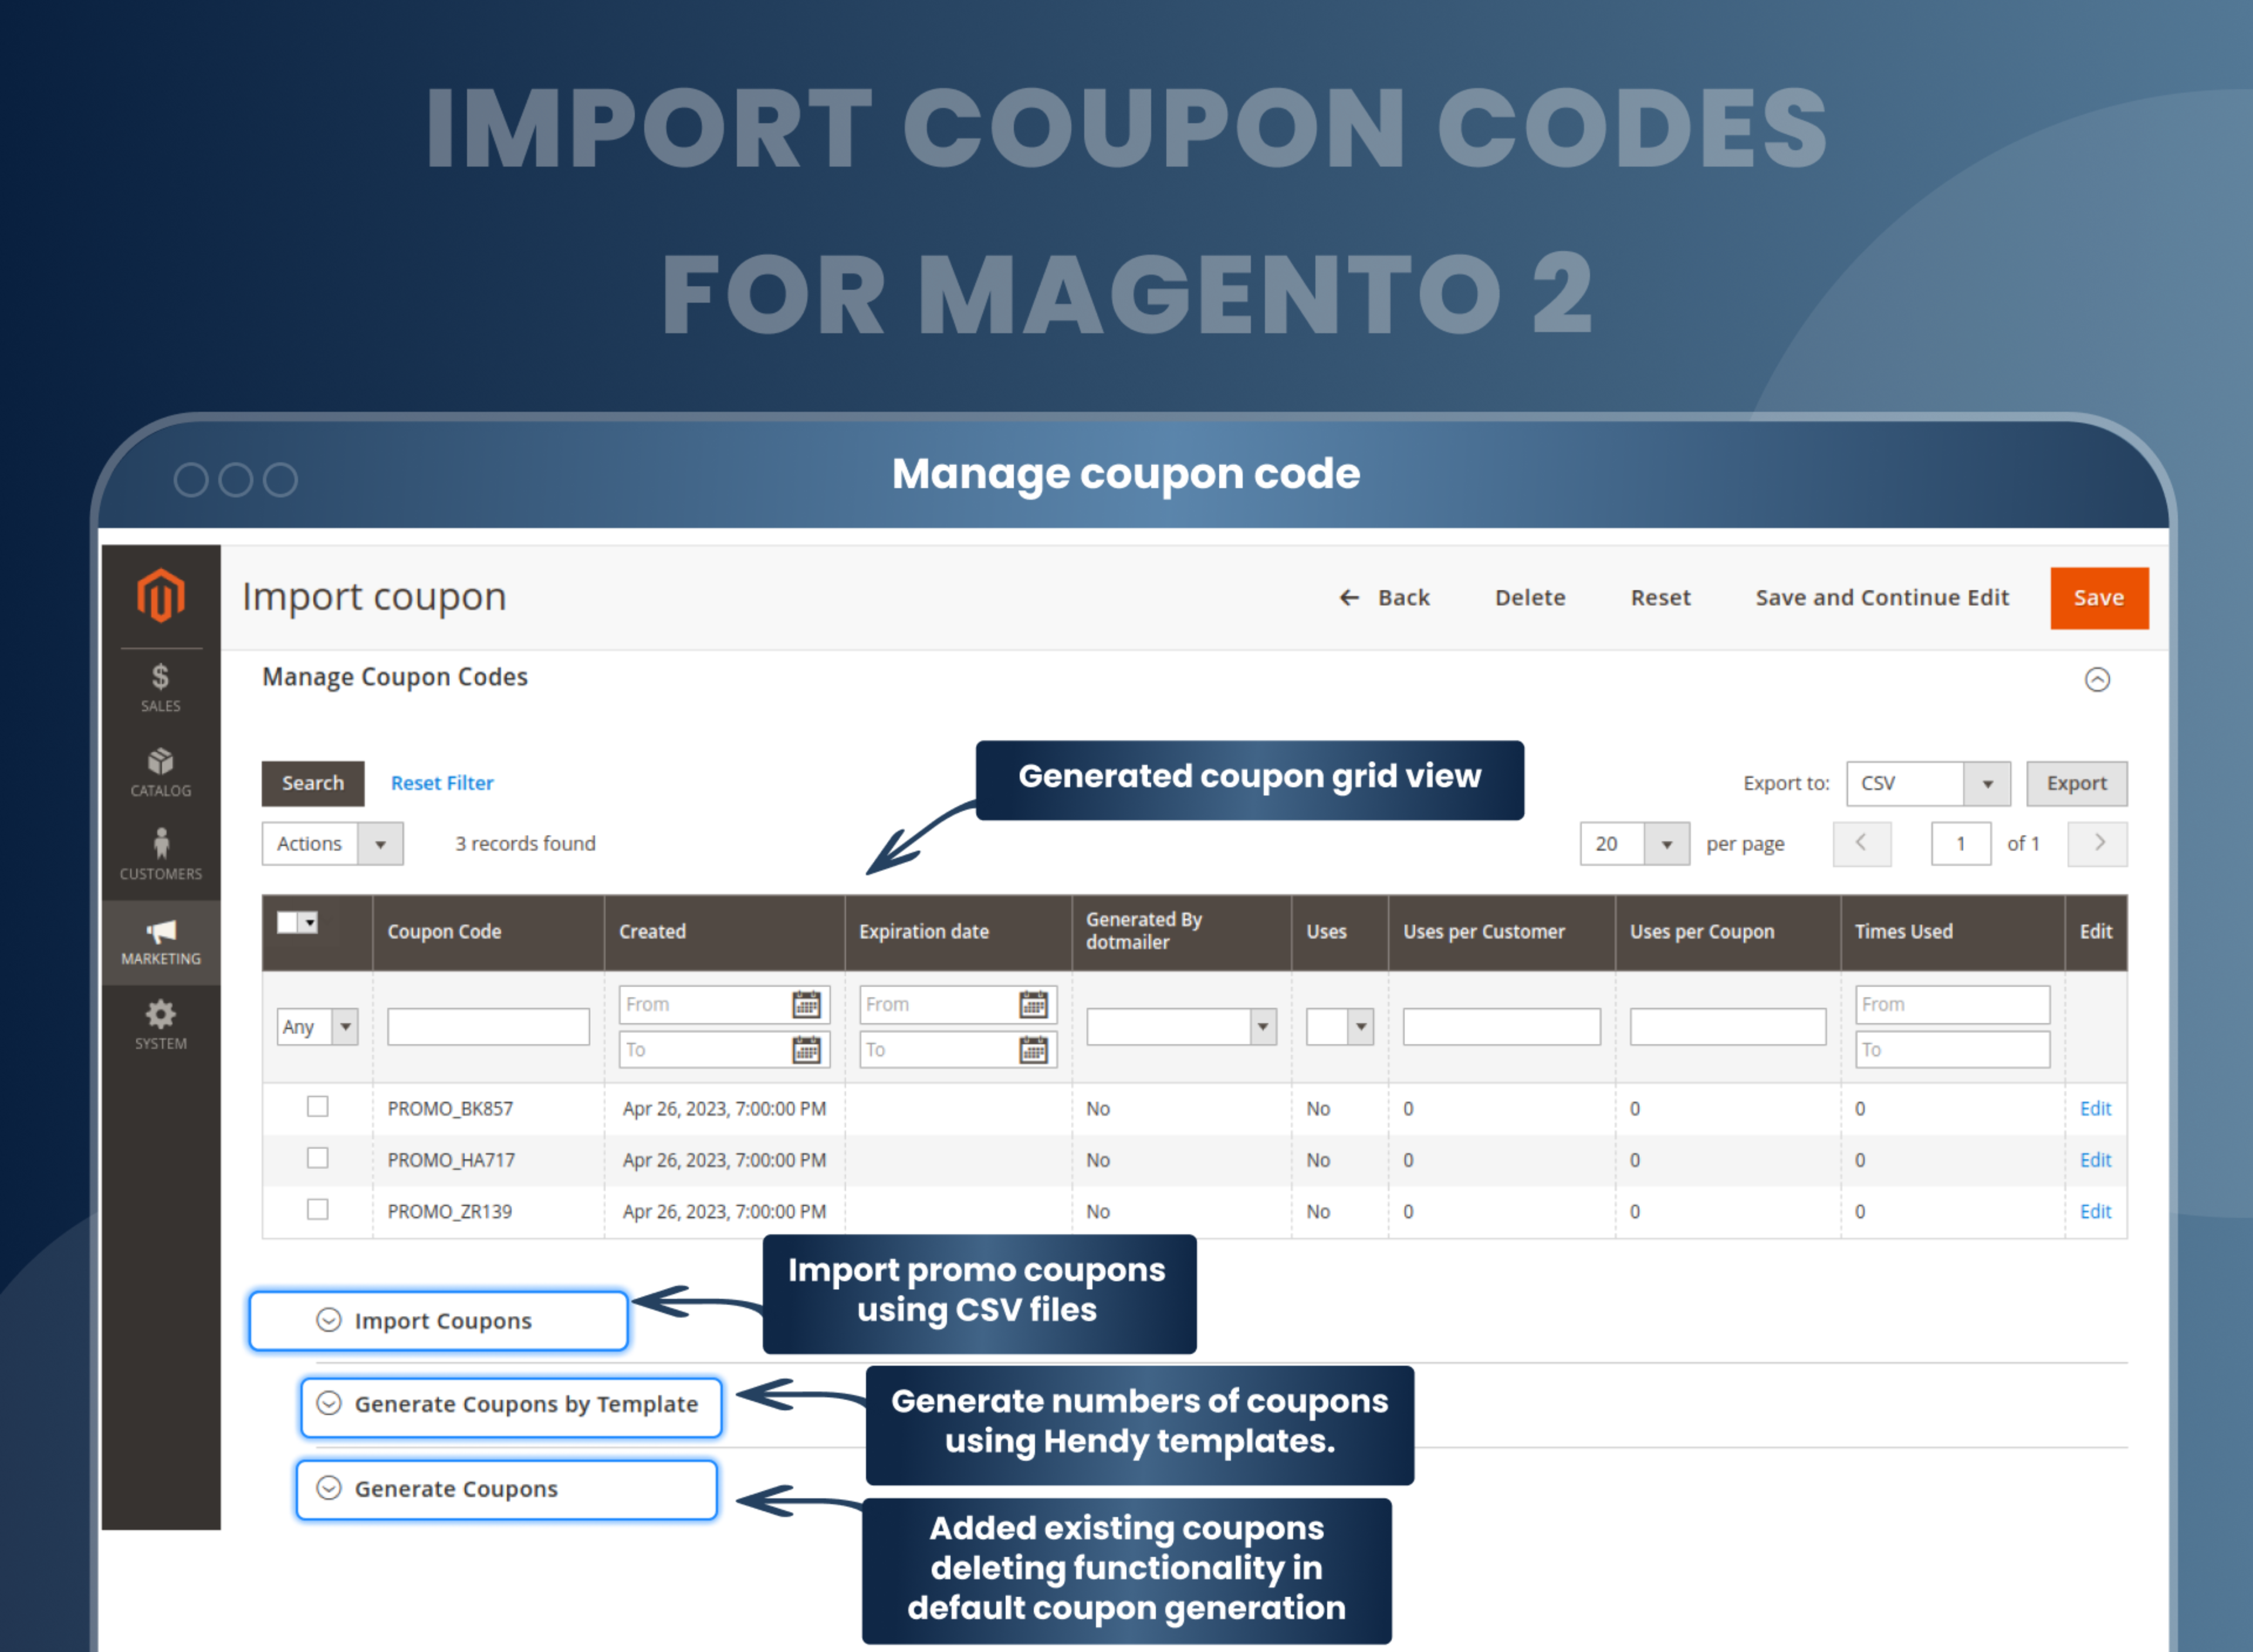 Manage coupon code